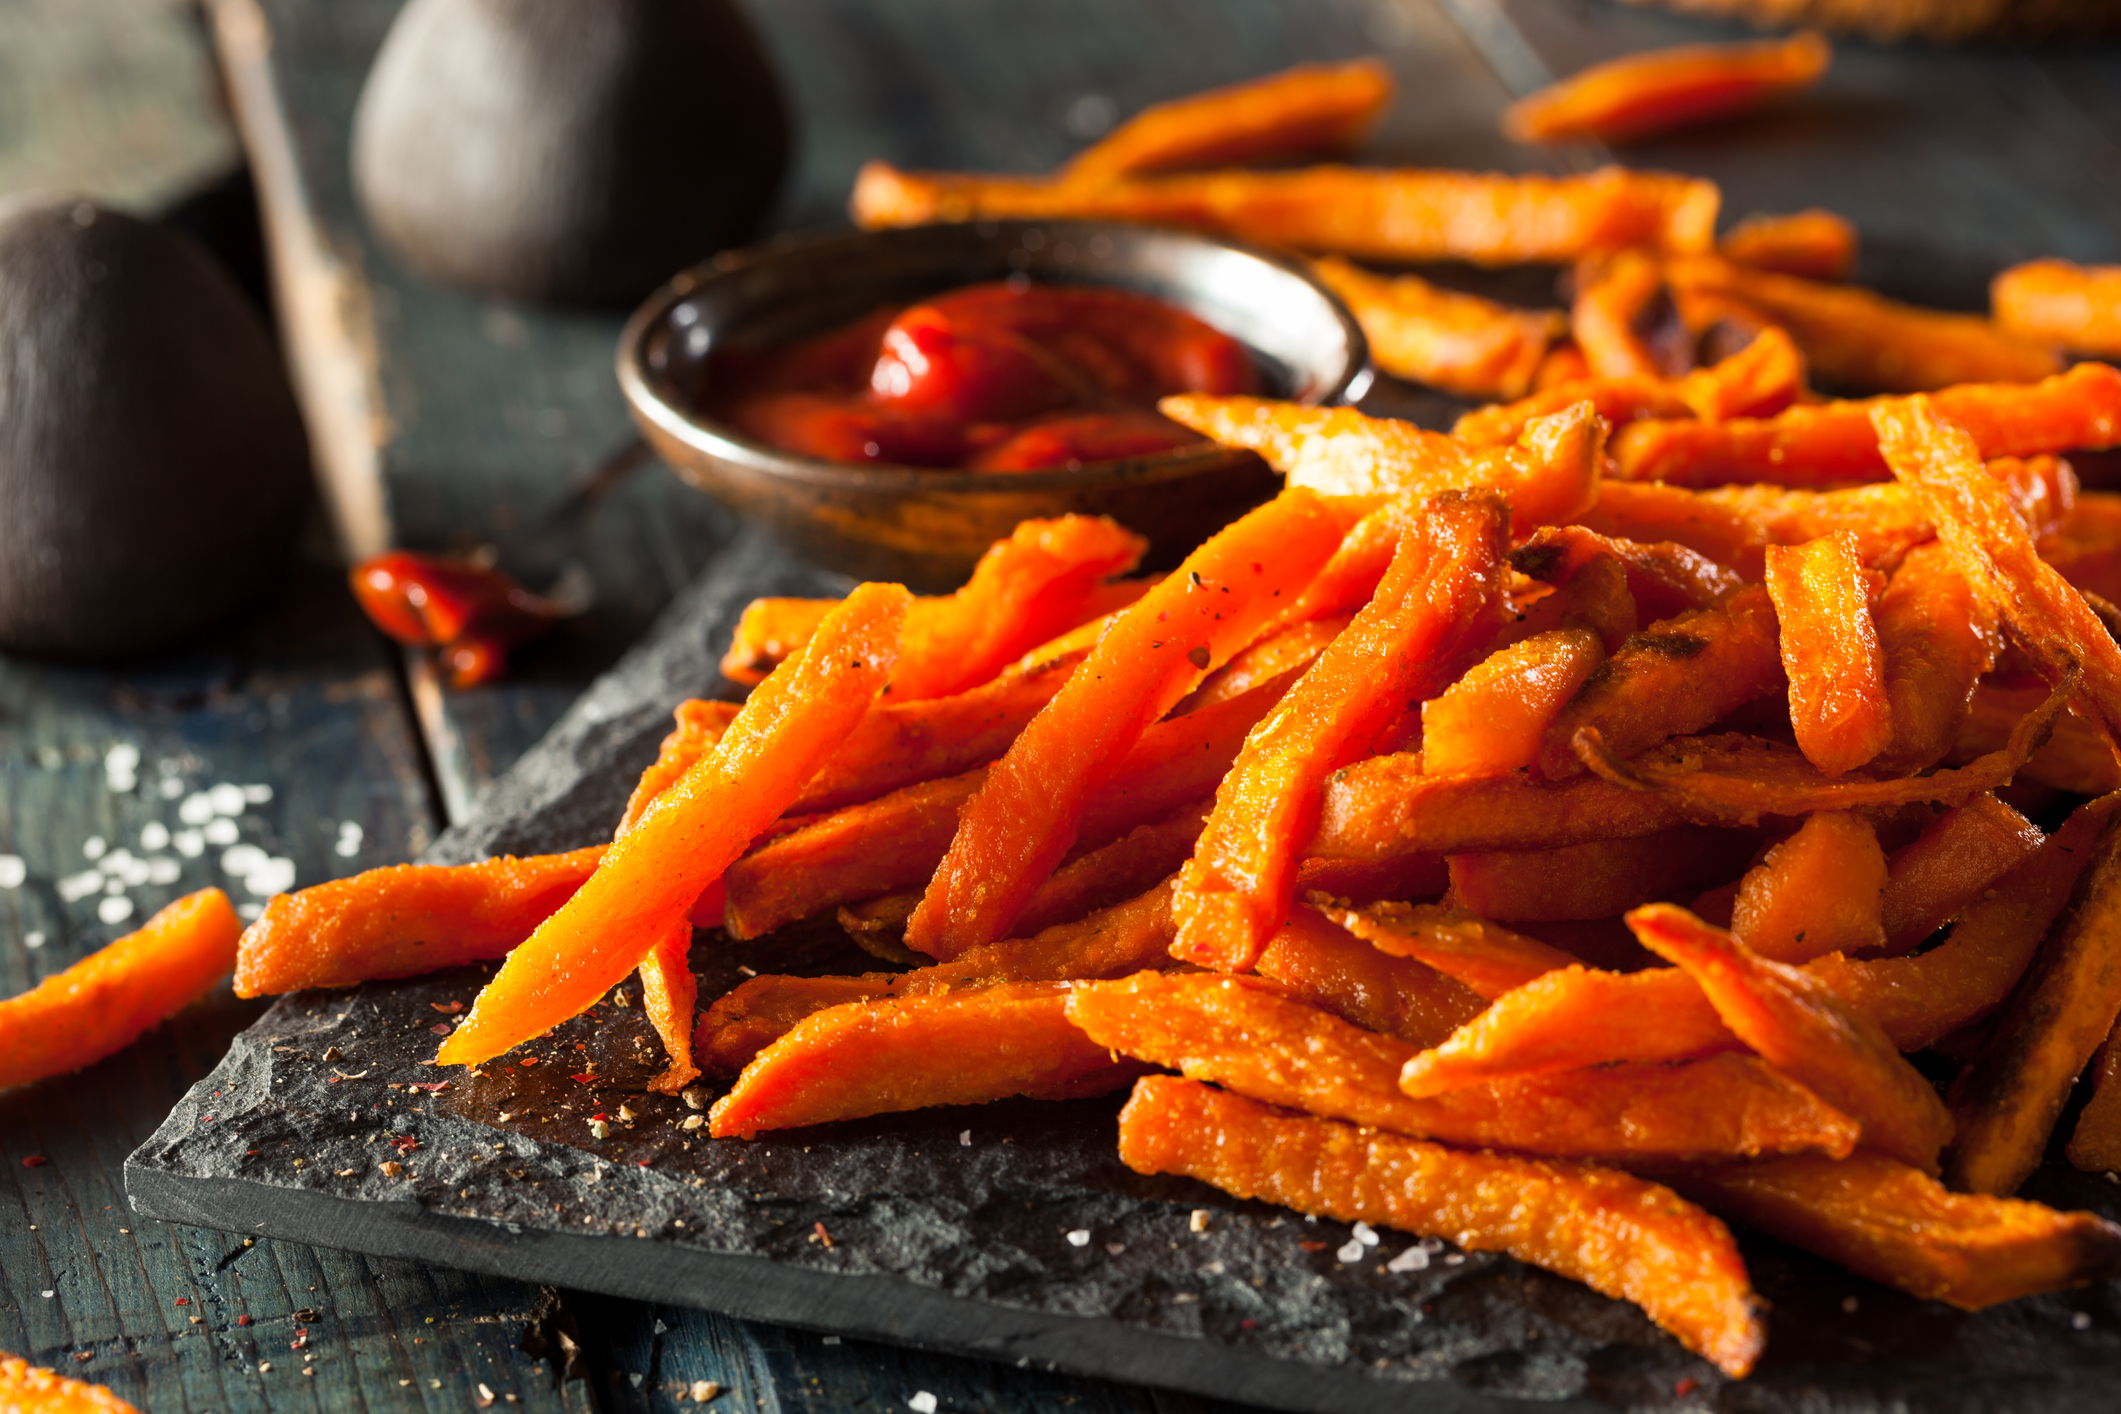 Sweet potato fries are not much healthier than regular ones. 